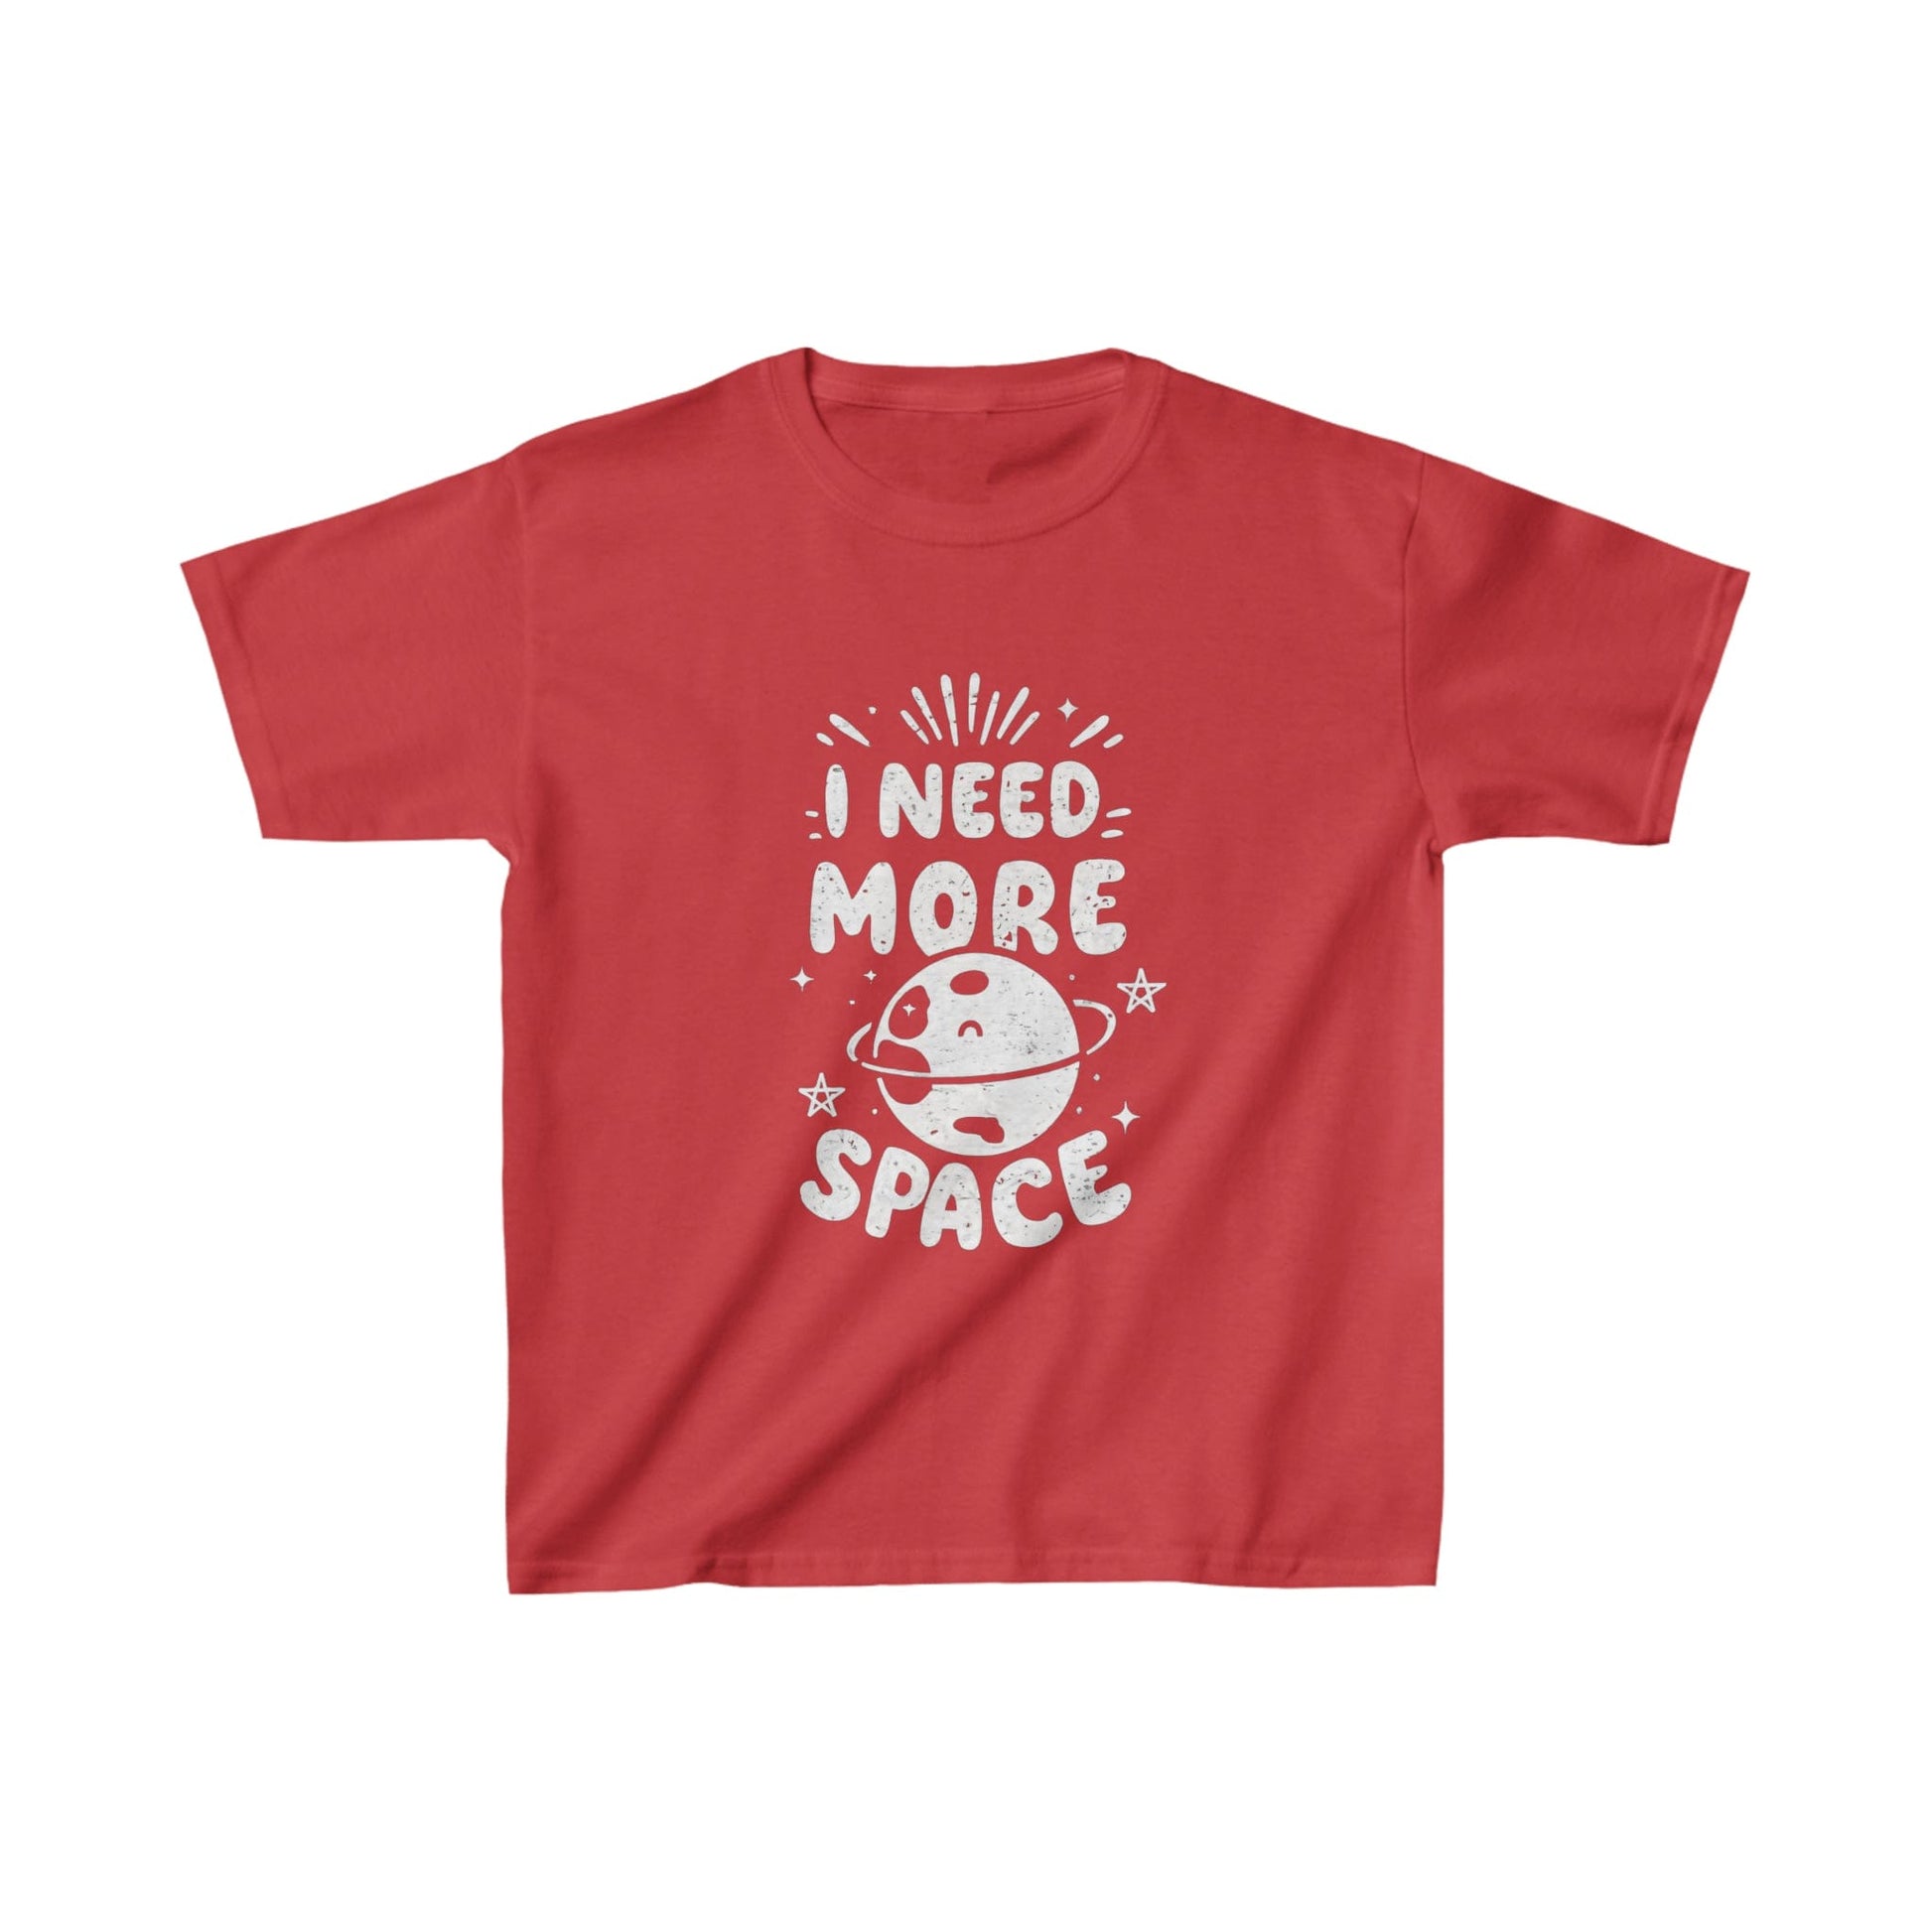 Kids clothes XS / Red Youth I Need More Space T-Shirt